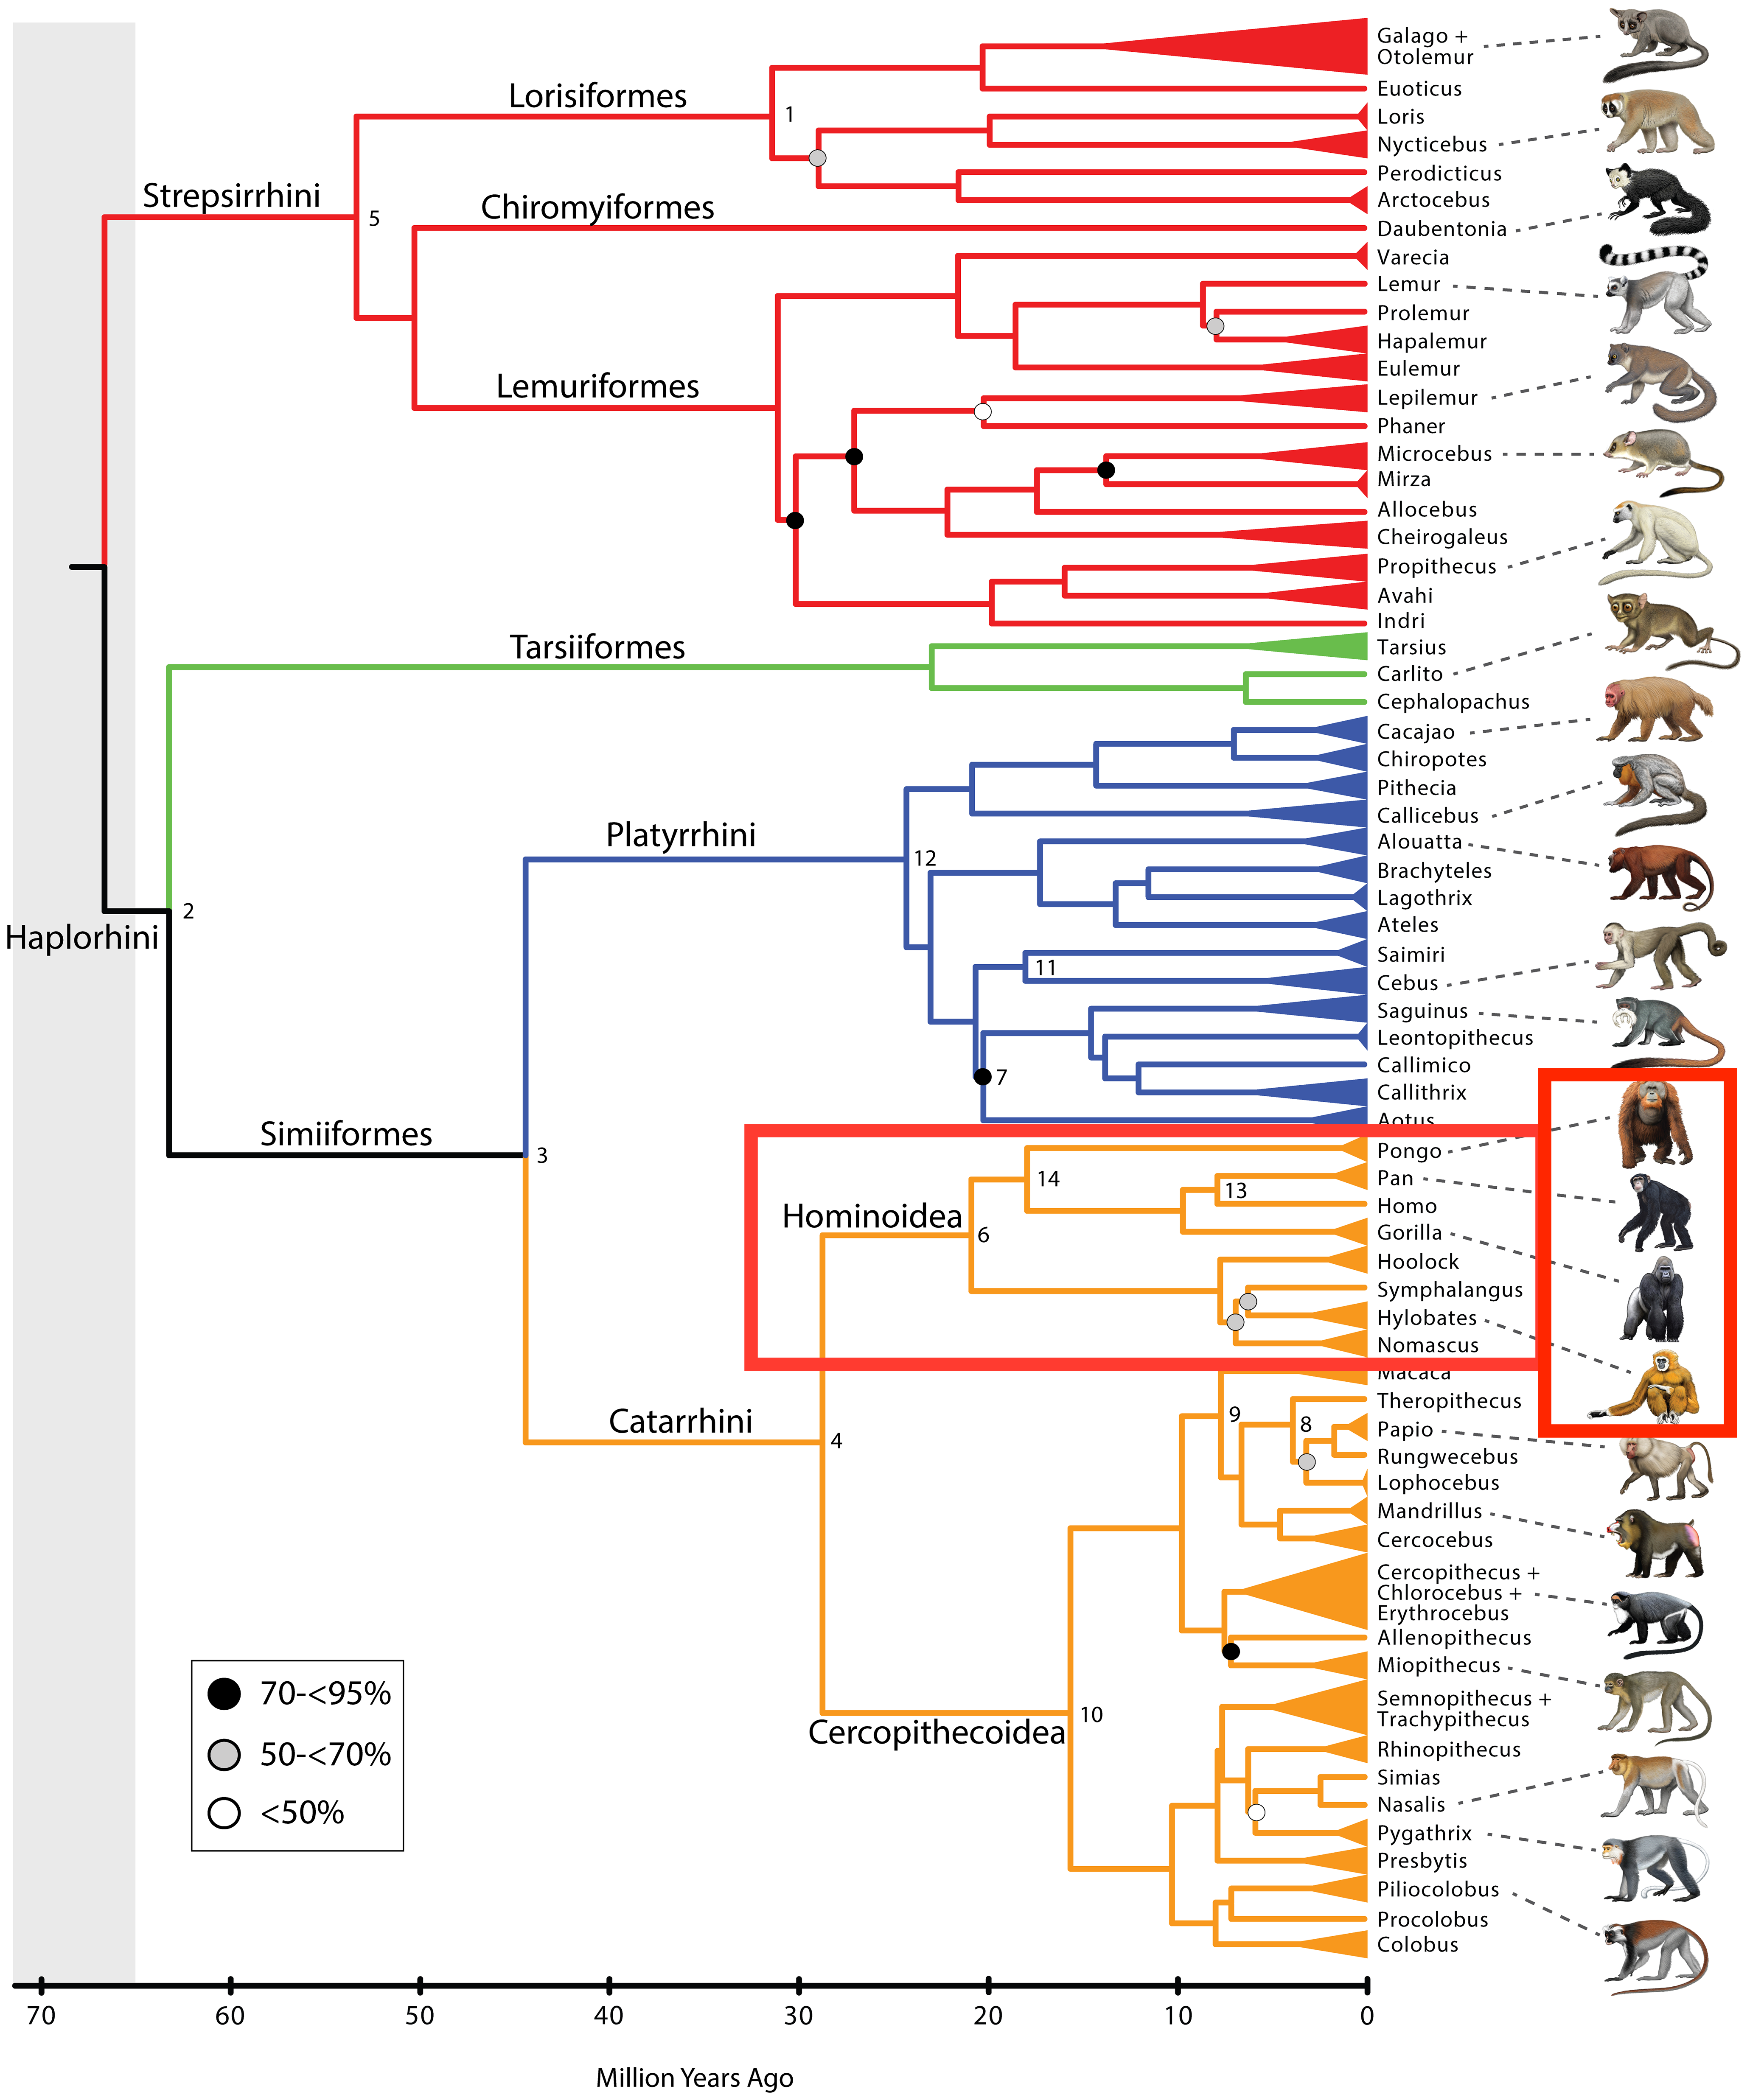 phylogeny of the primates.